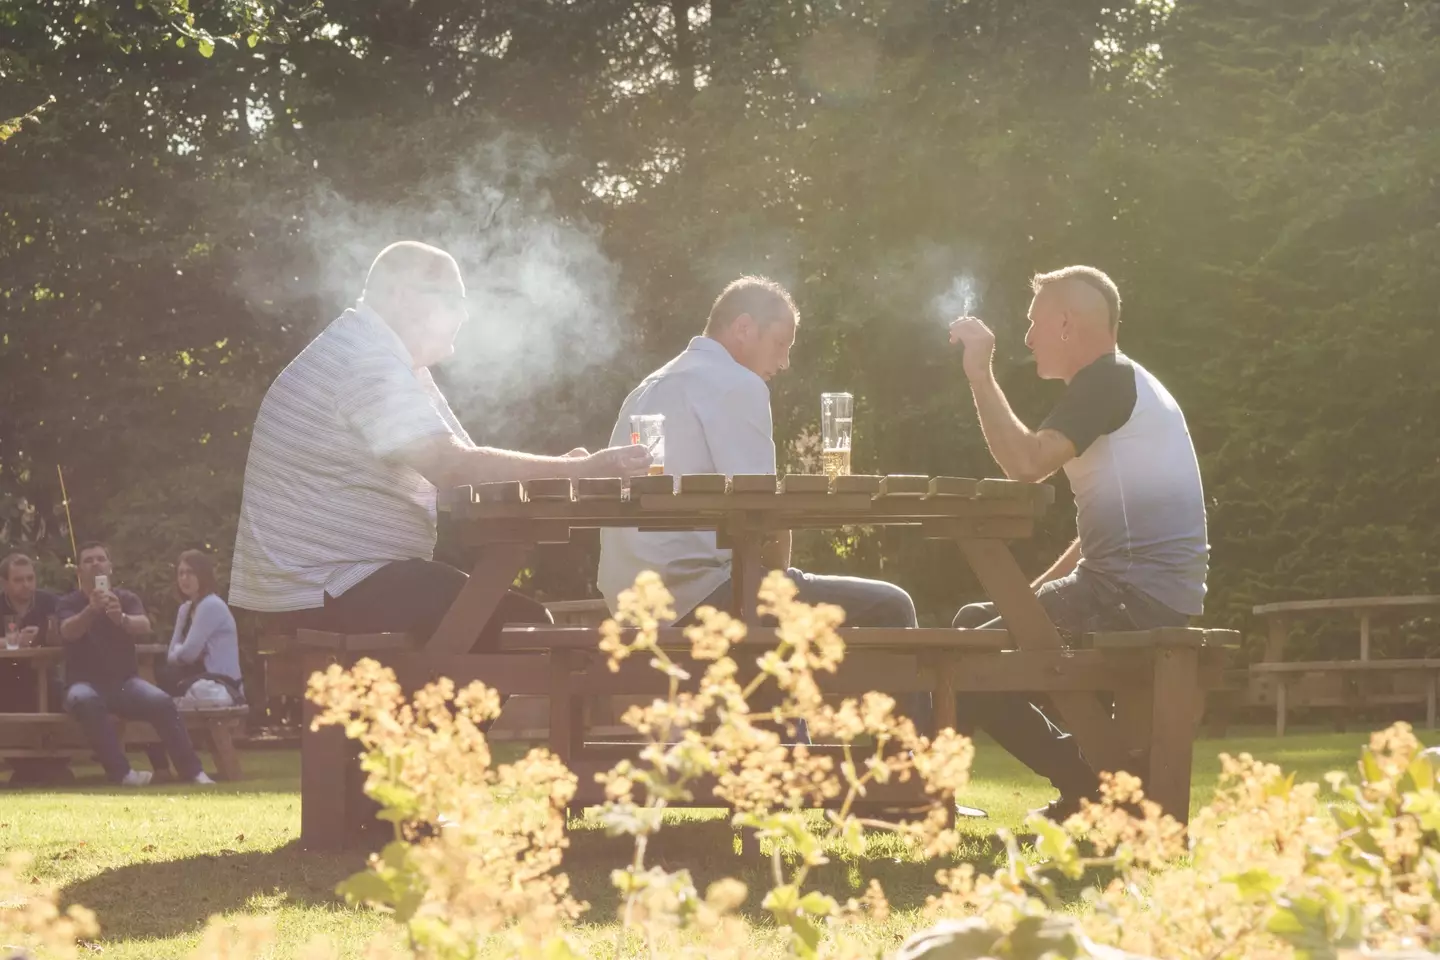 Smoking in a pub garden could soon be banned.